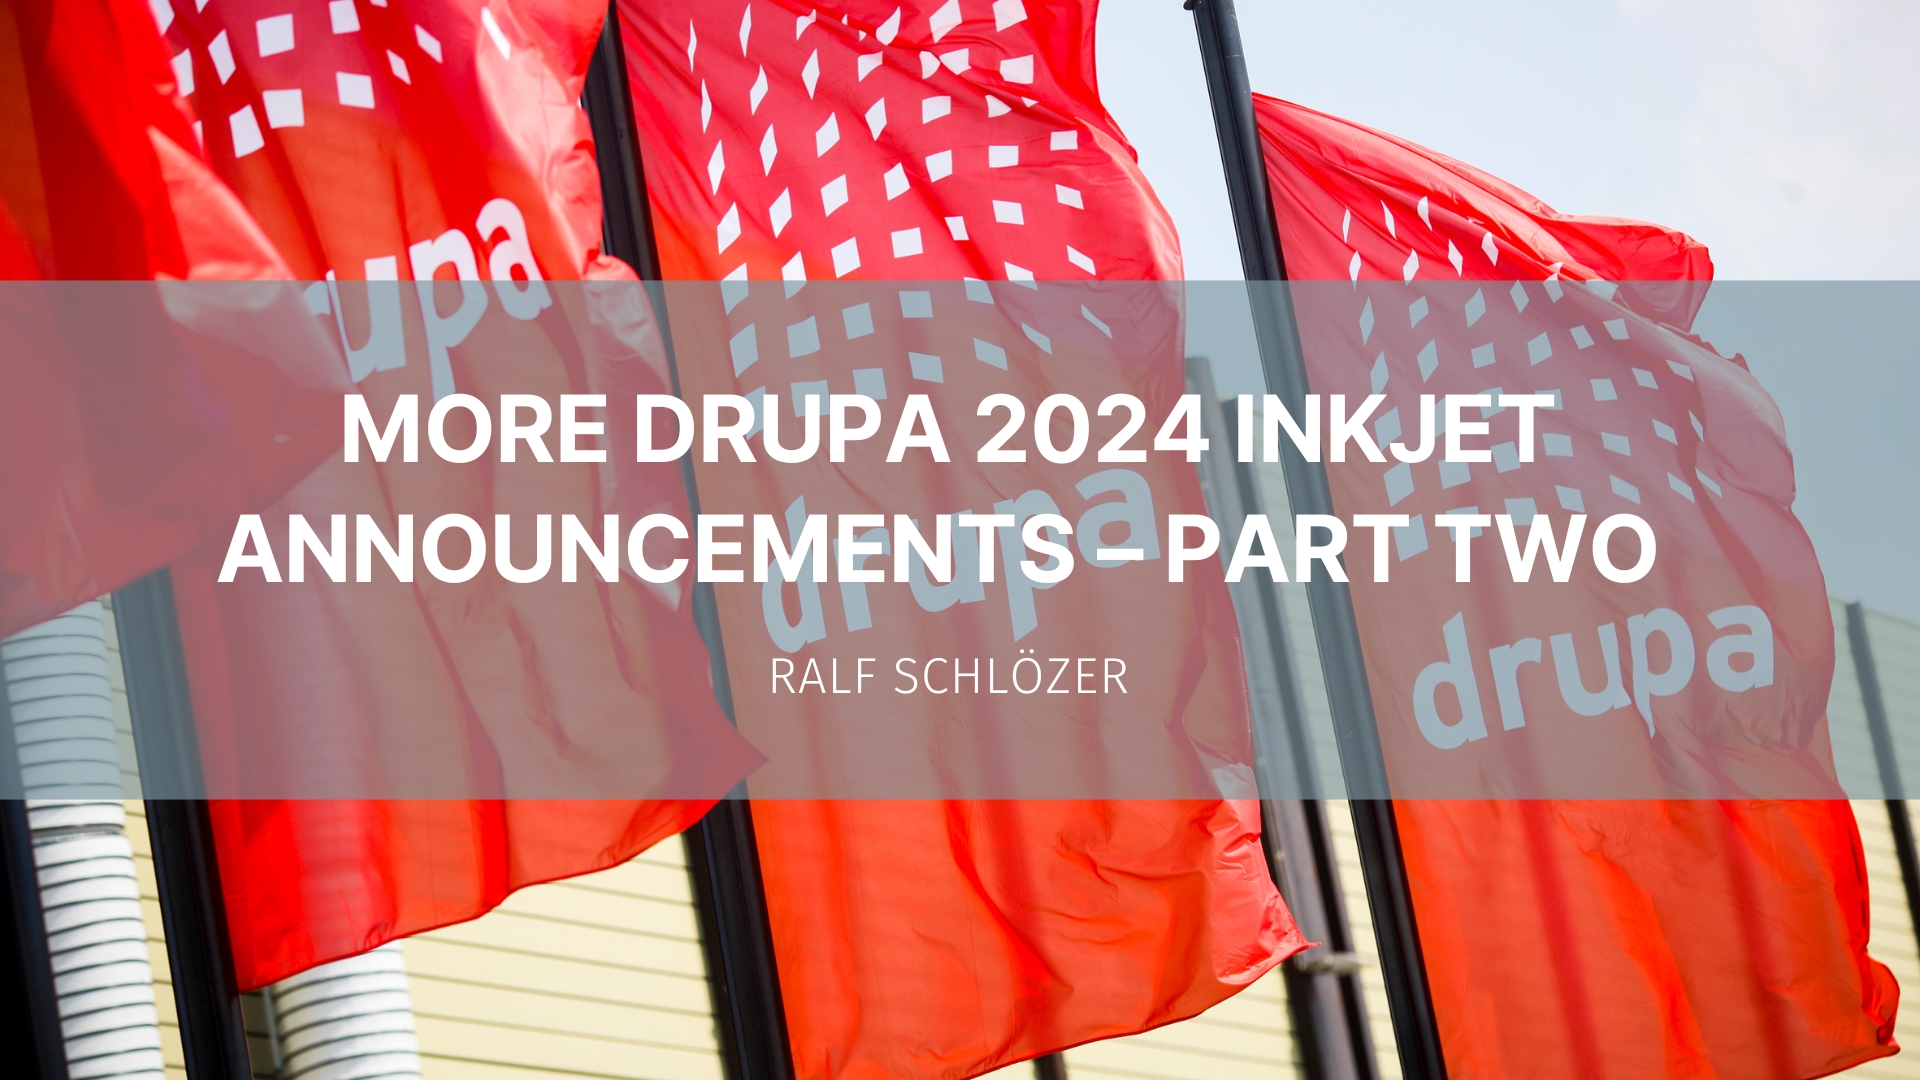 Featured image for “More Drupa 2024 inkjet announcements – part two”